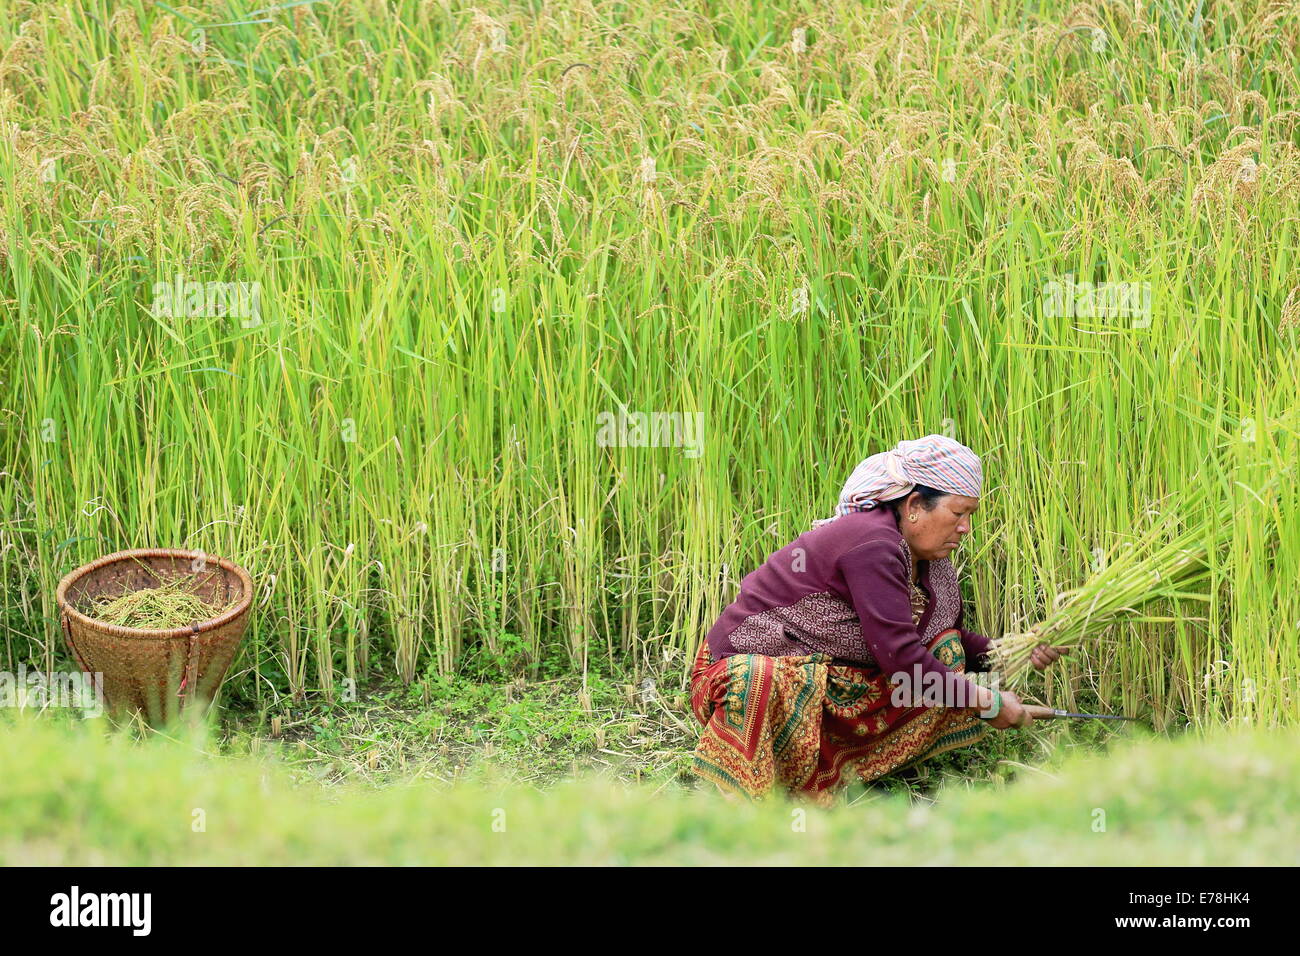 GHANDRUK, NEPAL - OCTOBER 10: Nepalese woman crops by hand with a sickle some rice ears on October 10, 2012 in Ghandruk village- Stock Photo